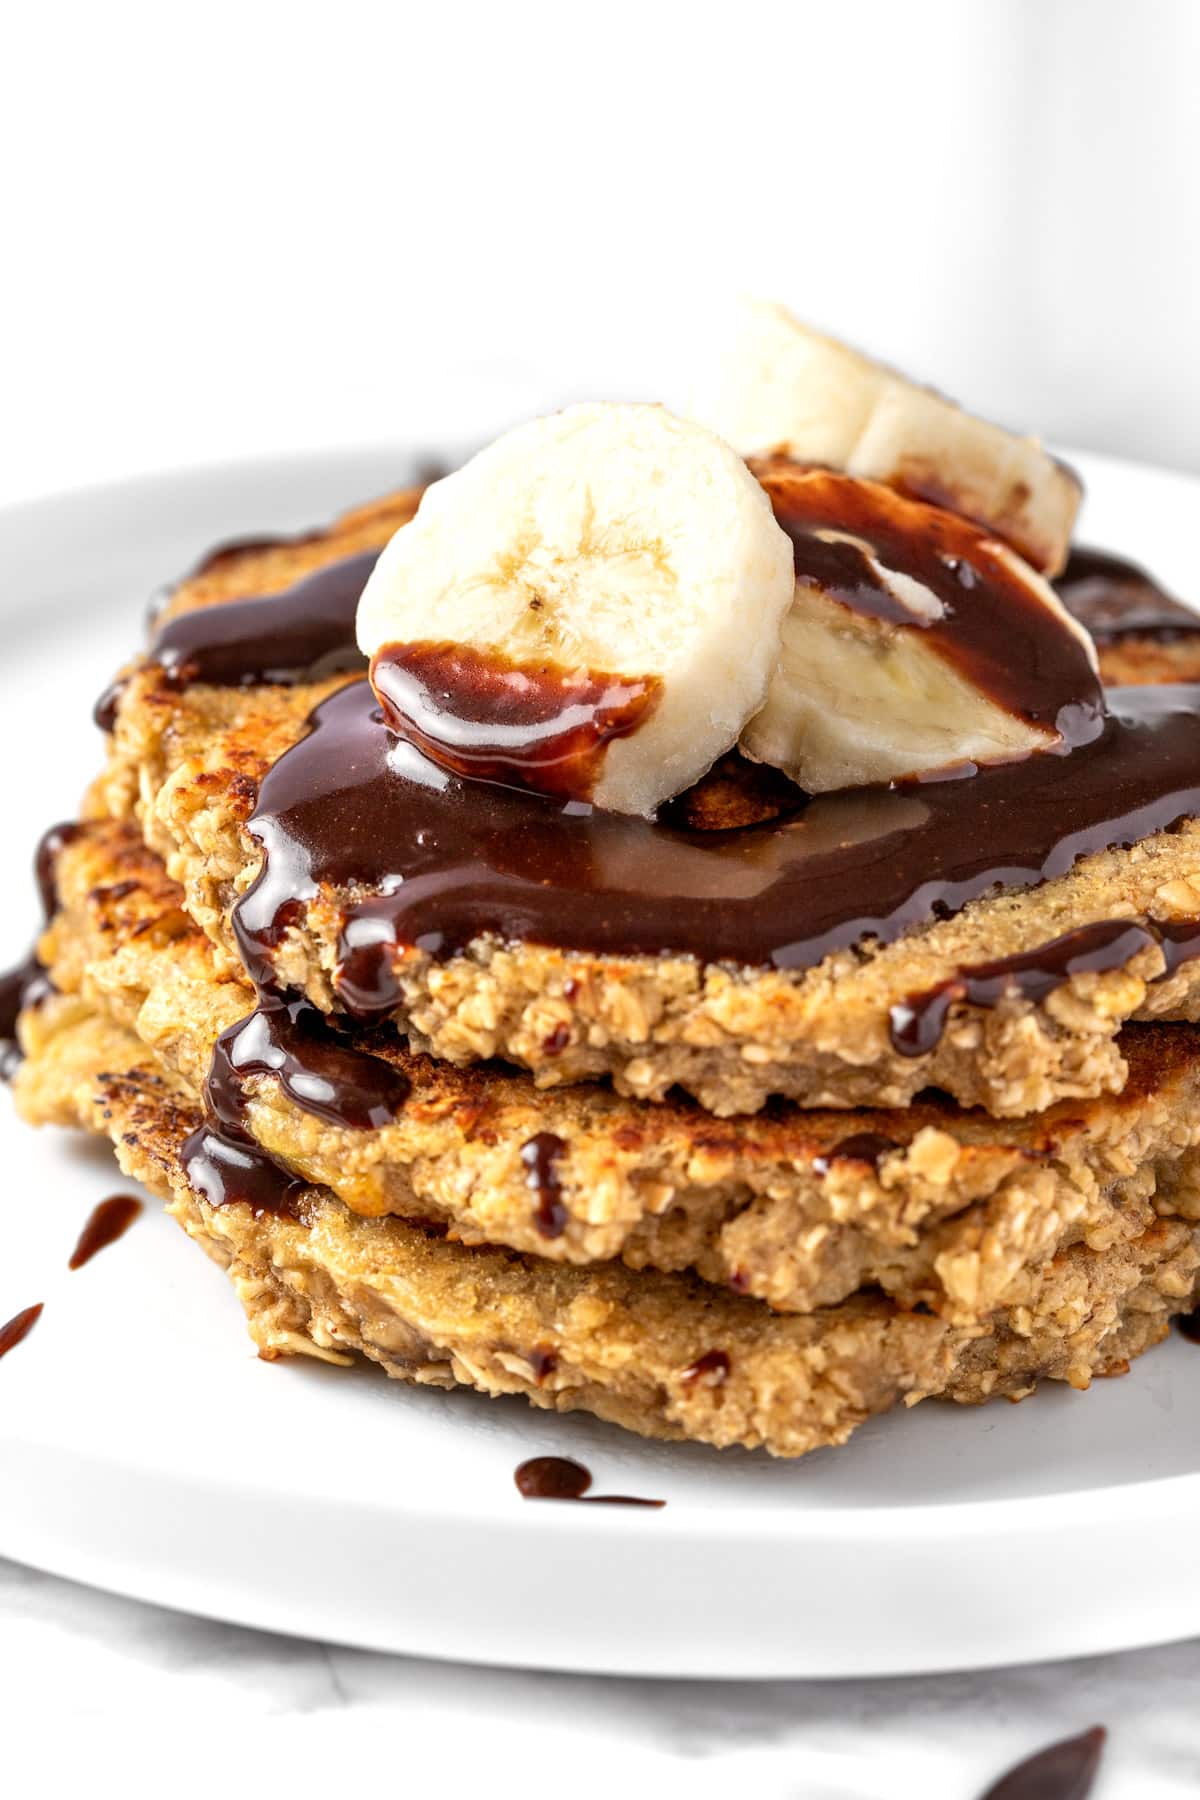 A stack of banana oat pancakes topped with banana slices and chocolate sauce.